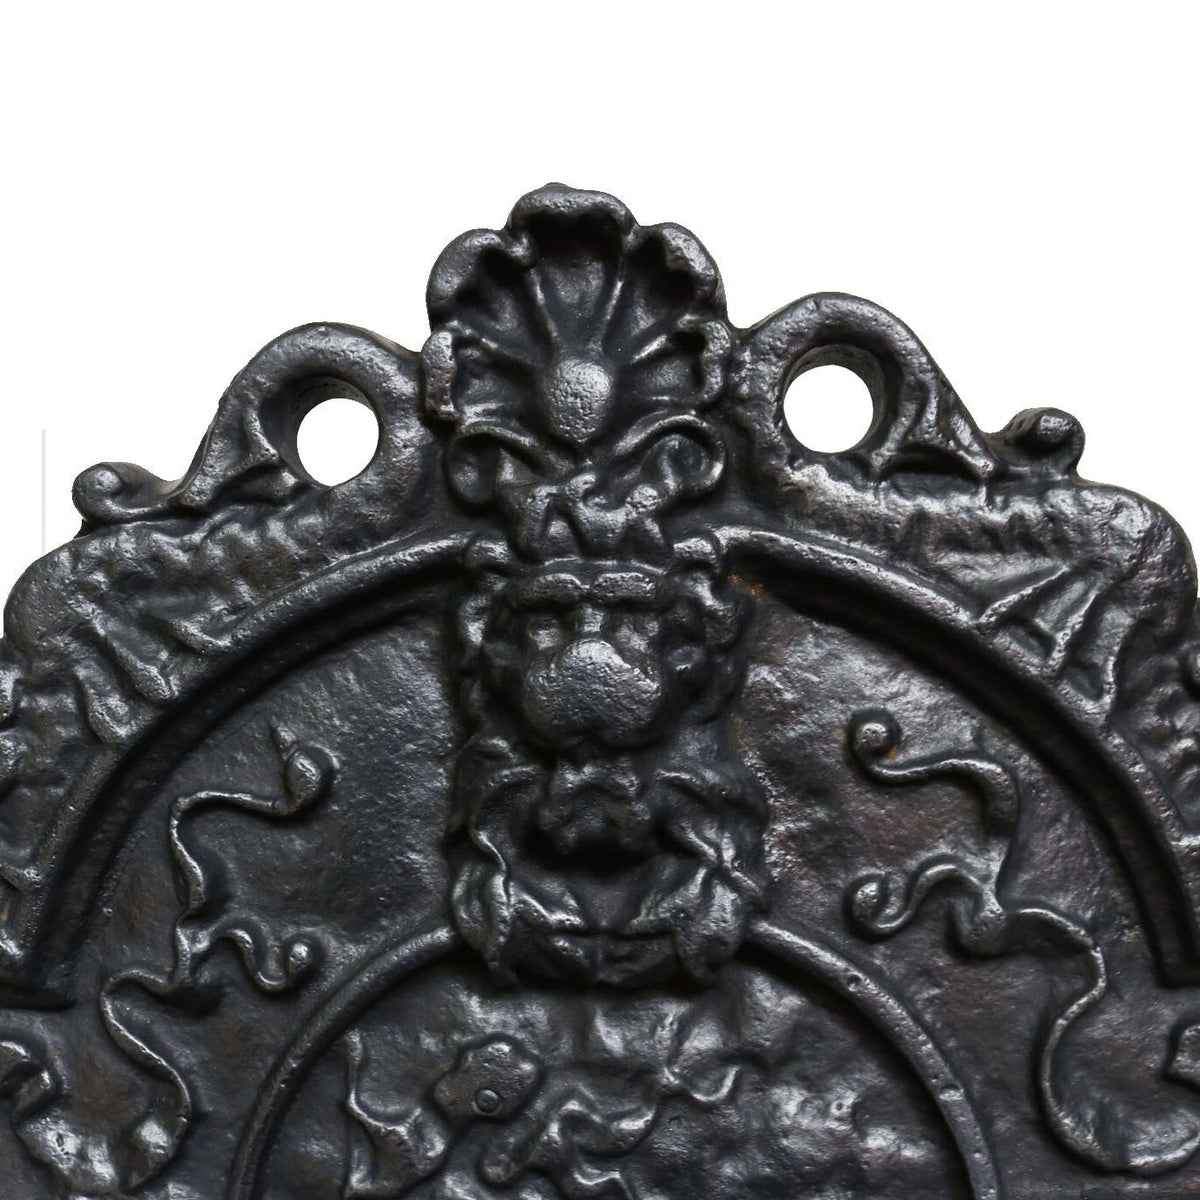 Antique Reclaimed Cast Iron Fireback | The Architectural Forum